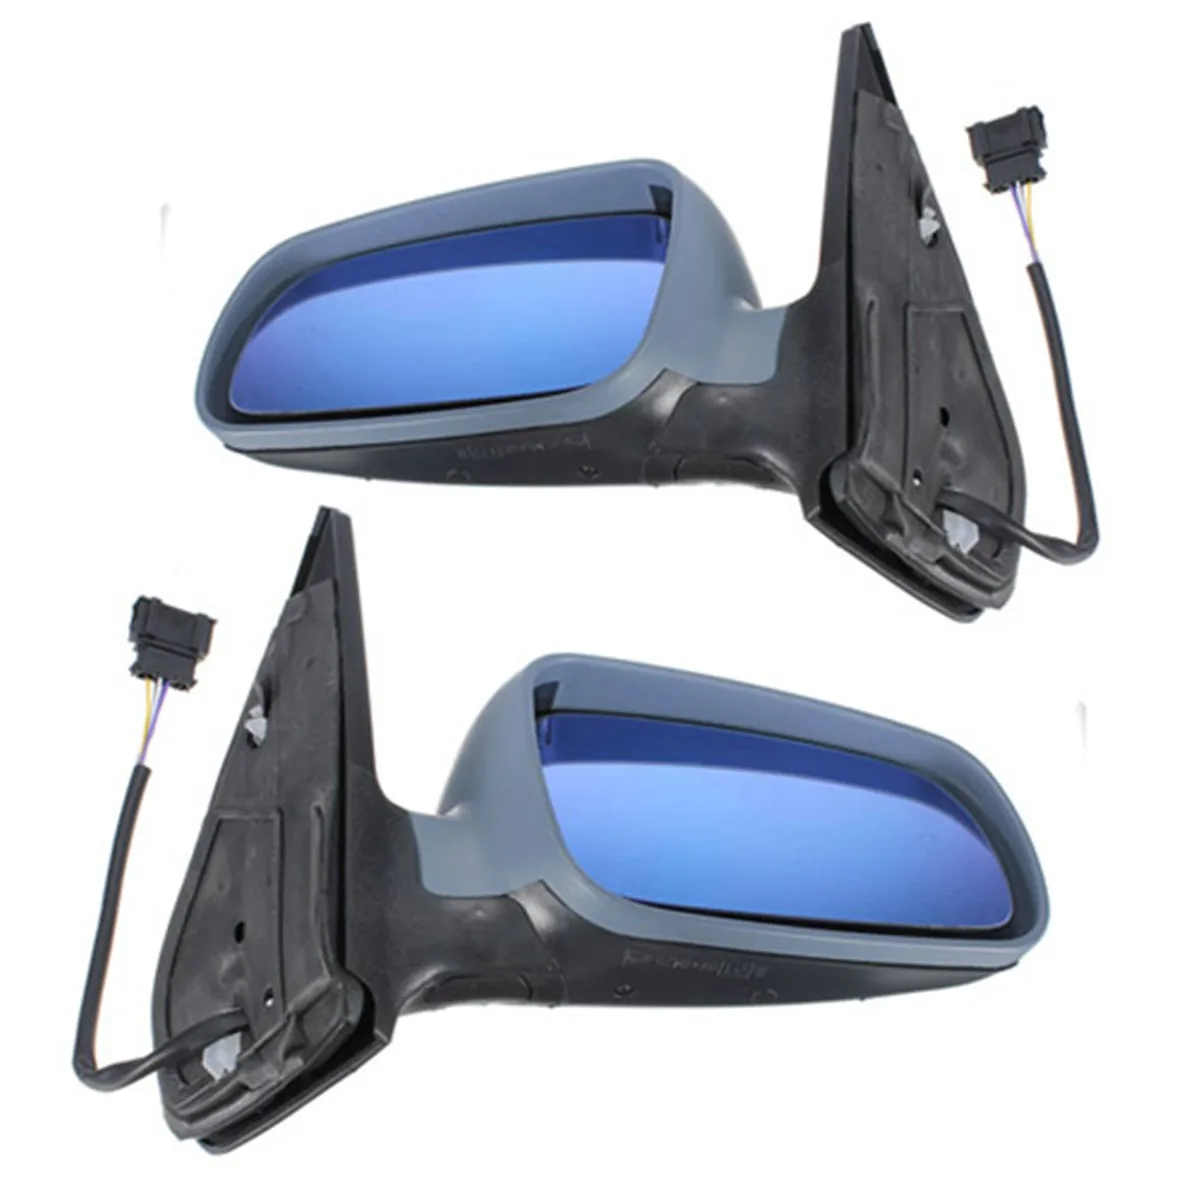 

Car Exterior Electric Wing Left /Right Side Door Mirror For VW Bora Golf Mk4 1997-2005